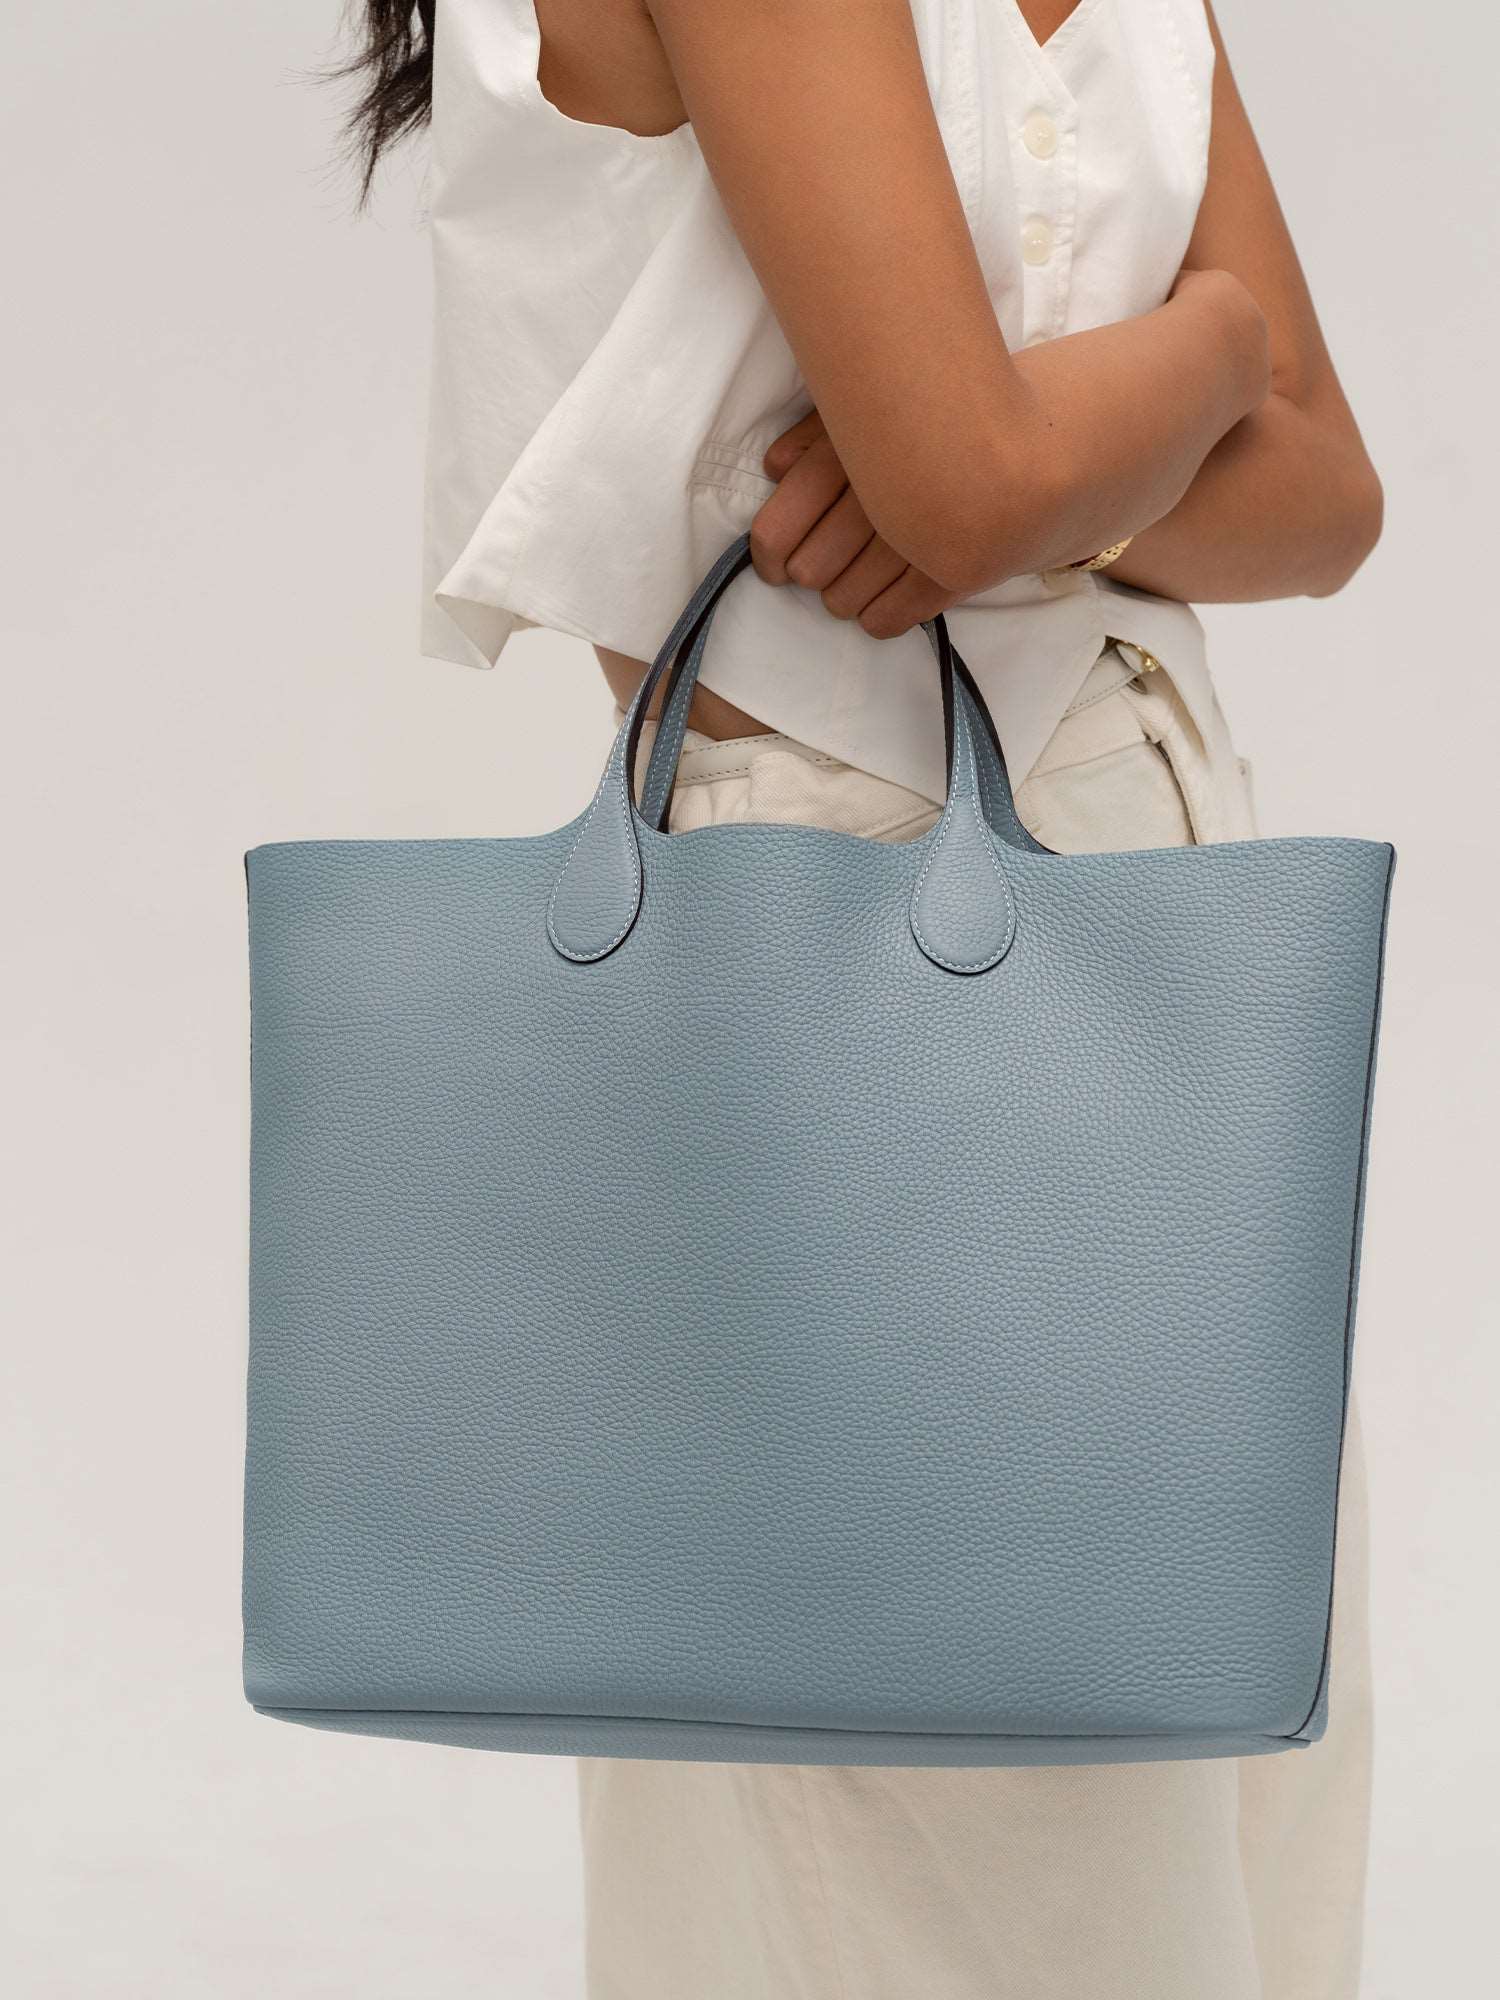 Hpai Large Yesod Tote Bag in Leather - Fog Blue